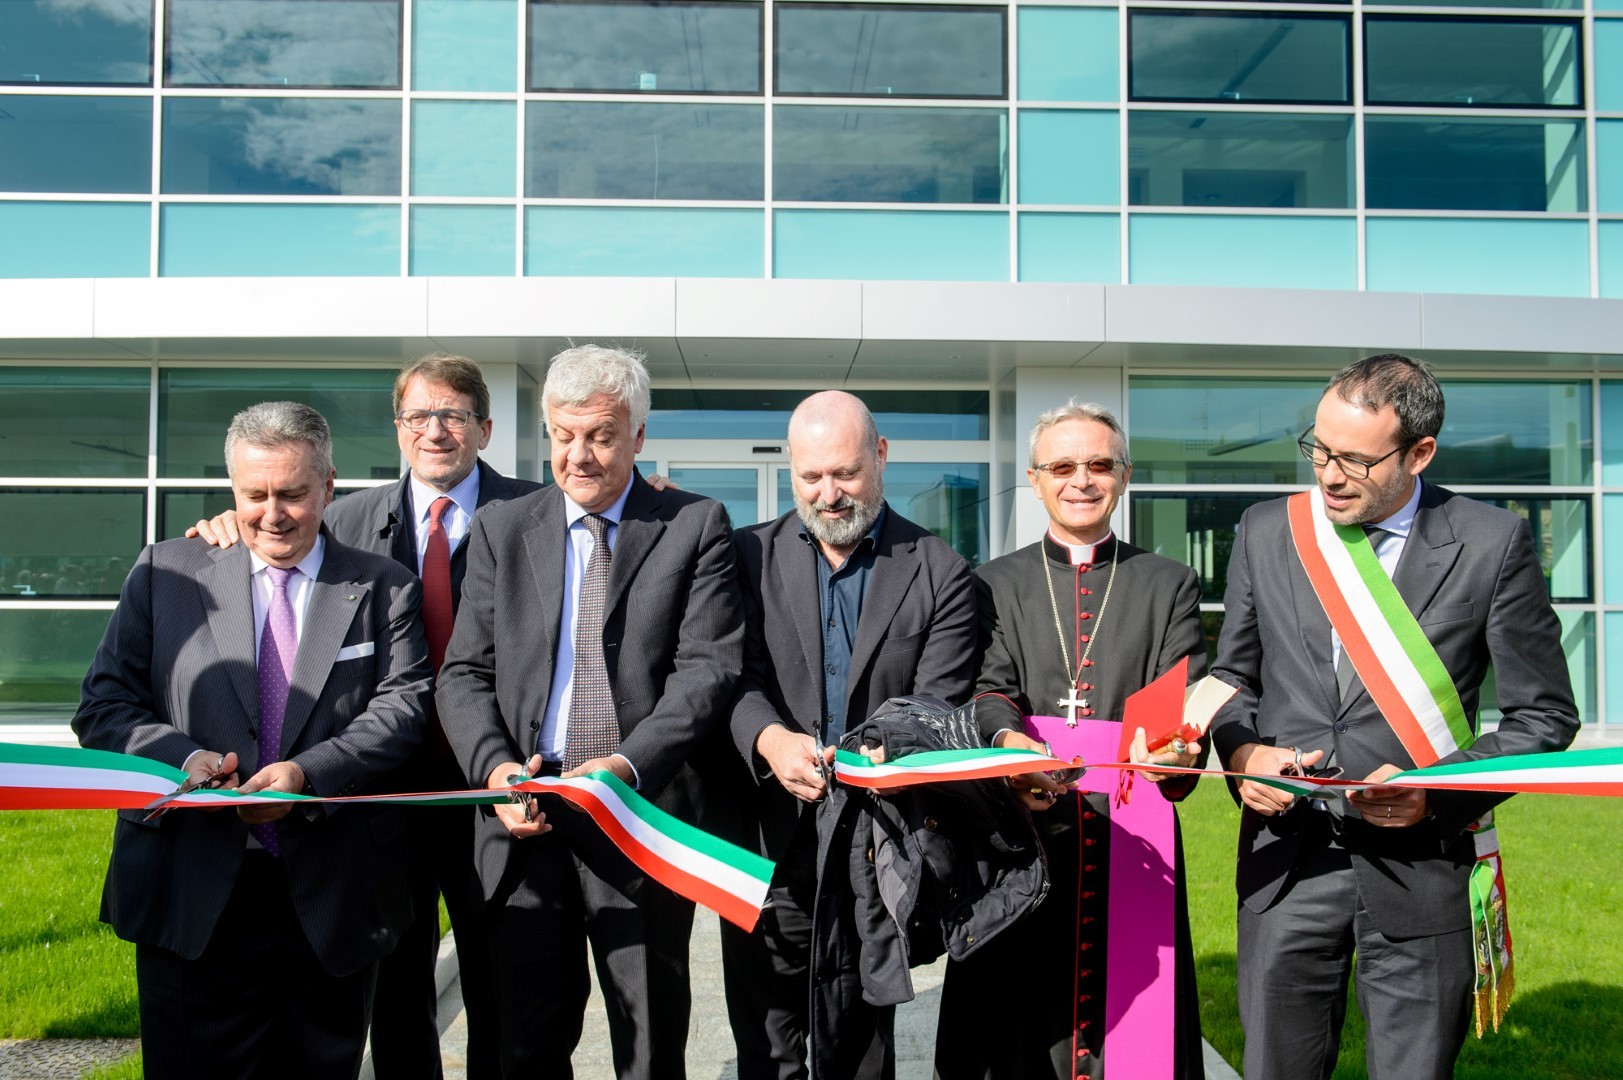 MARCHESINI GROUP INAUGURATES THE NEW FACTORY IN CARPI